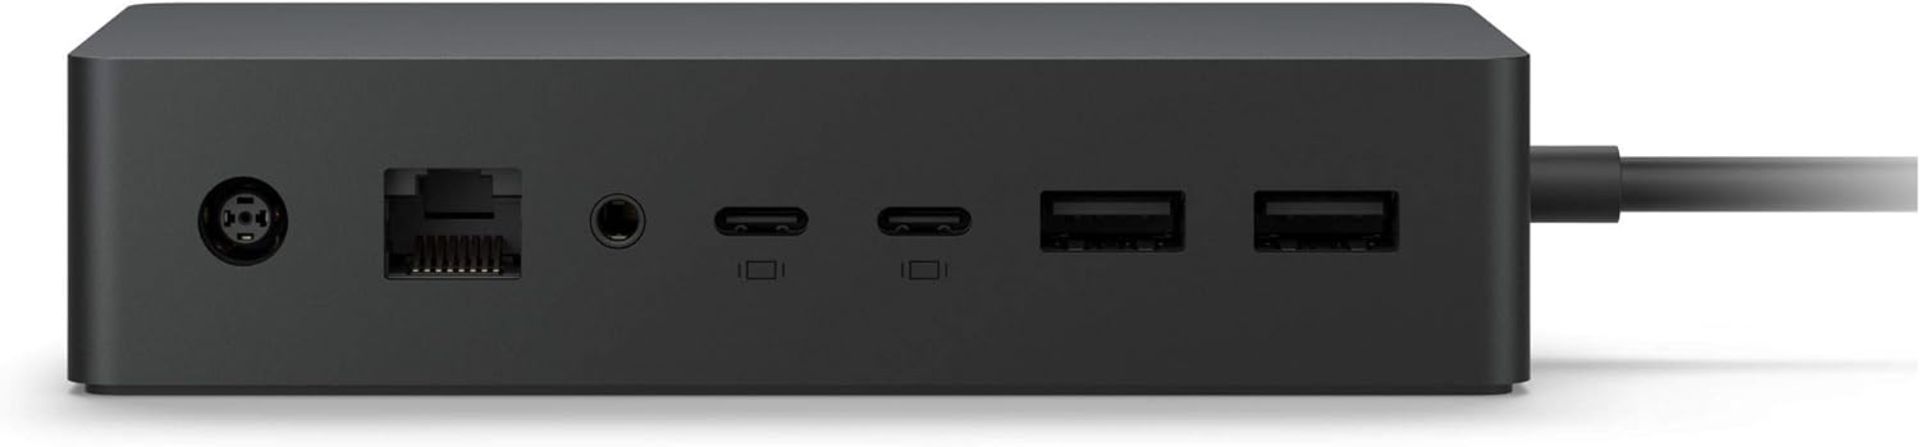 BRAND NEW FACTORY SEALED MICROSOFT Surface Dock 2. RRP £199.99. 199W pass through charging. Dual - Image 2 of 5